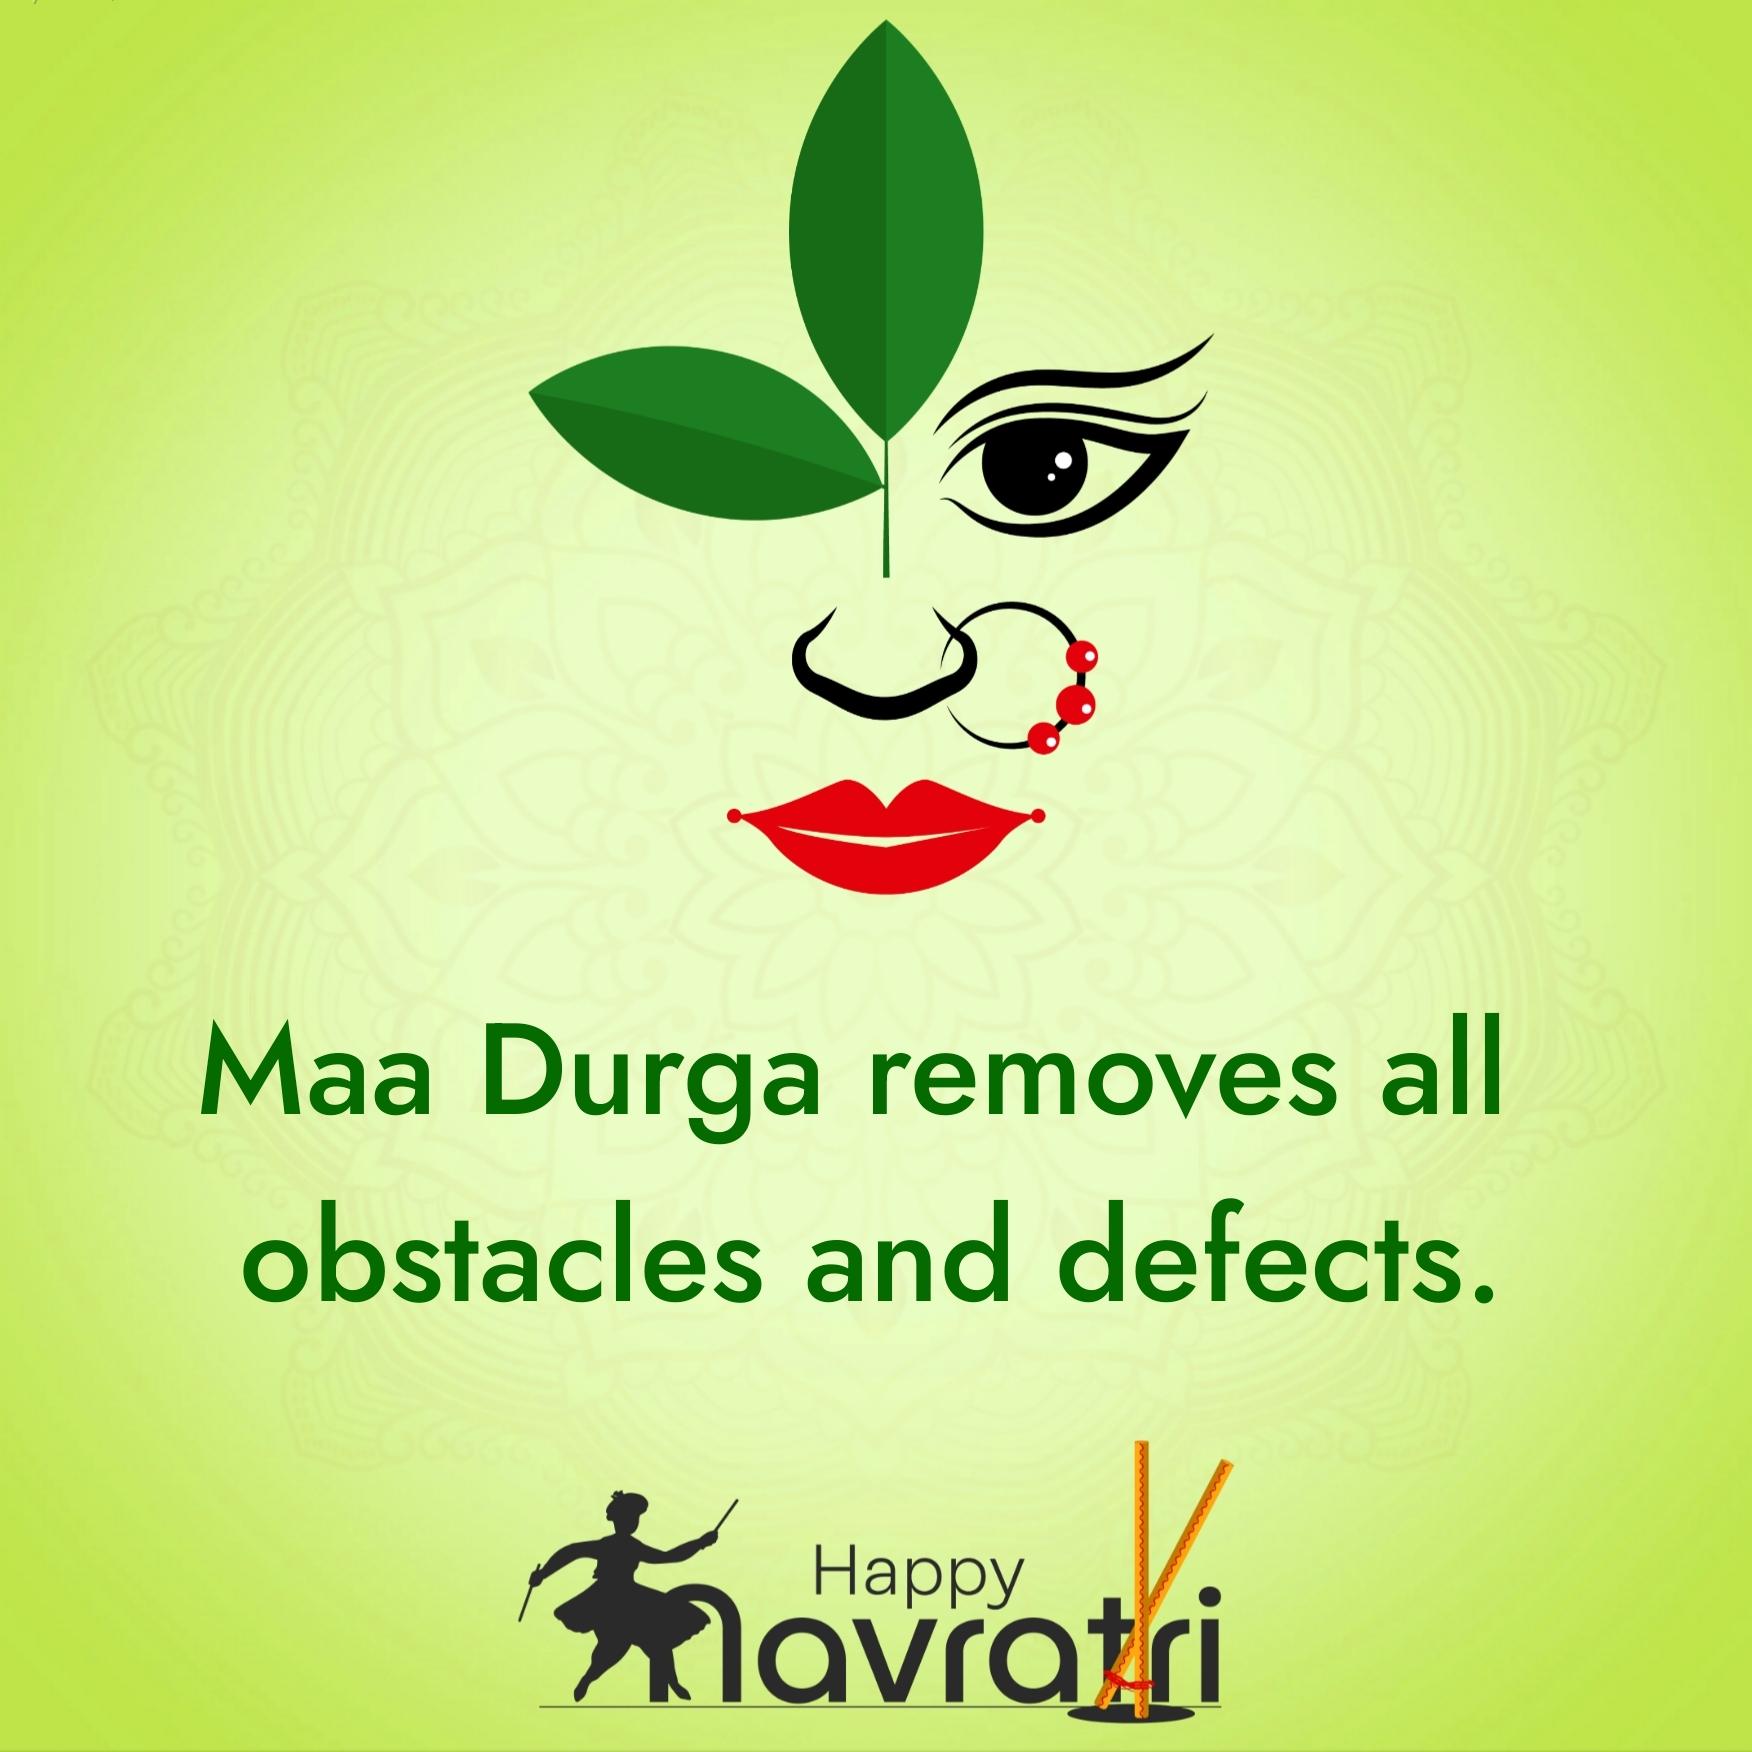 Maa Durga removes all obstacles and defects